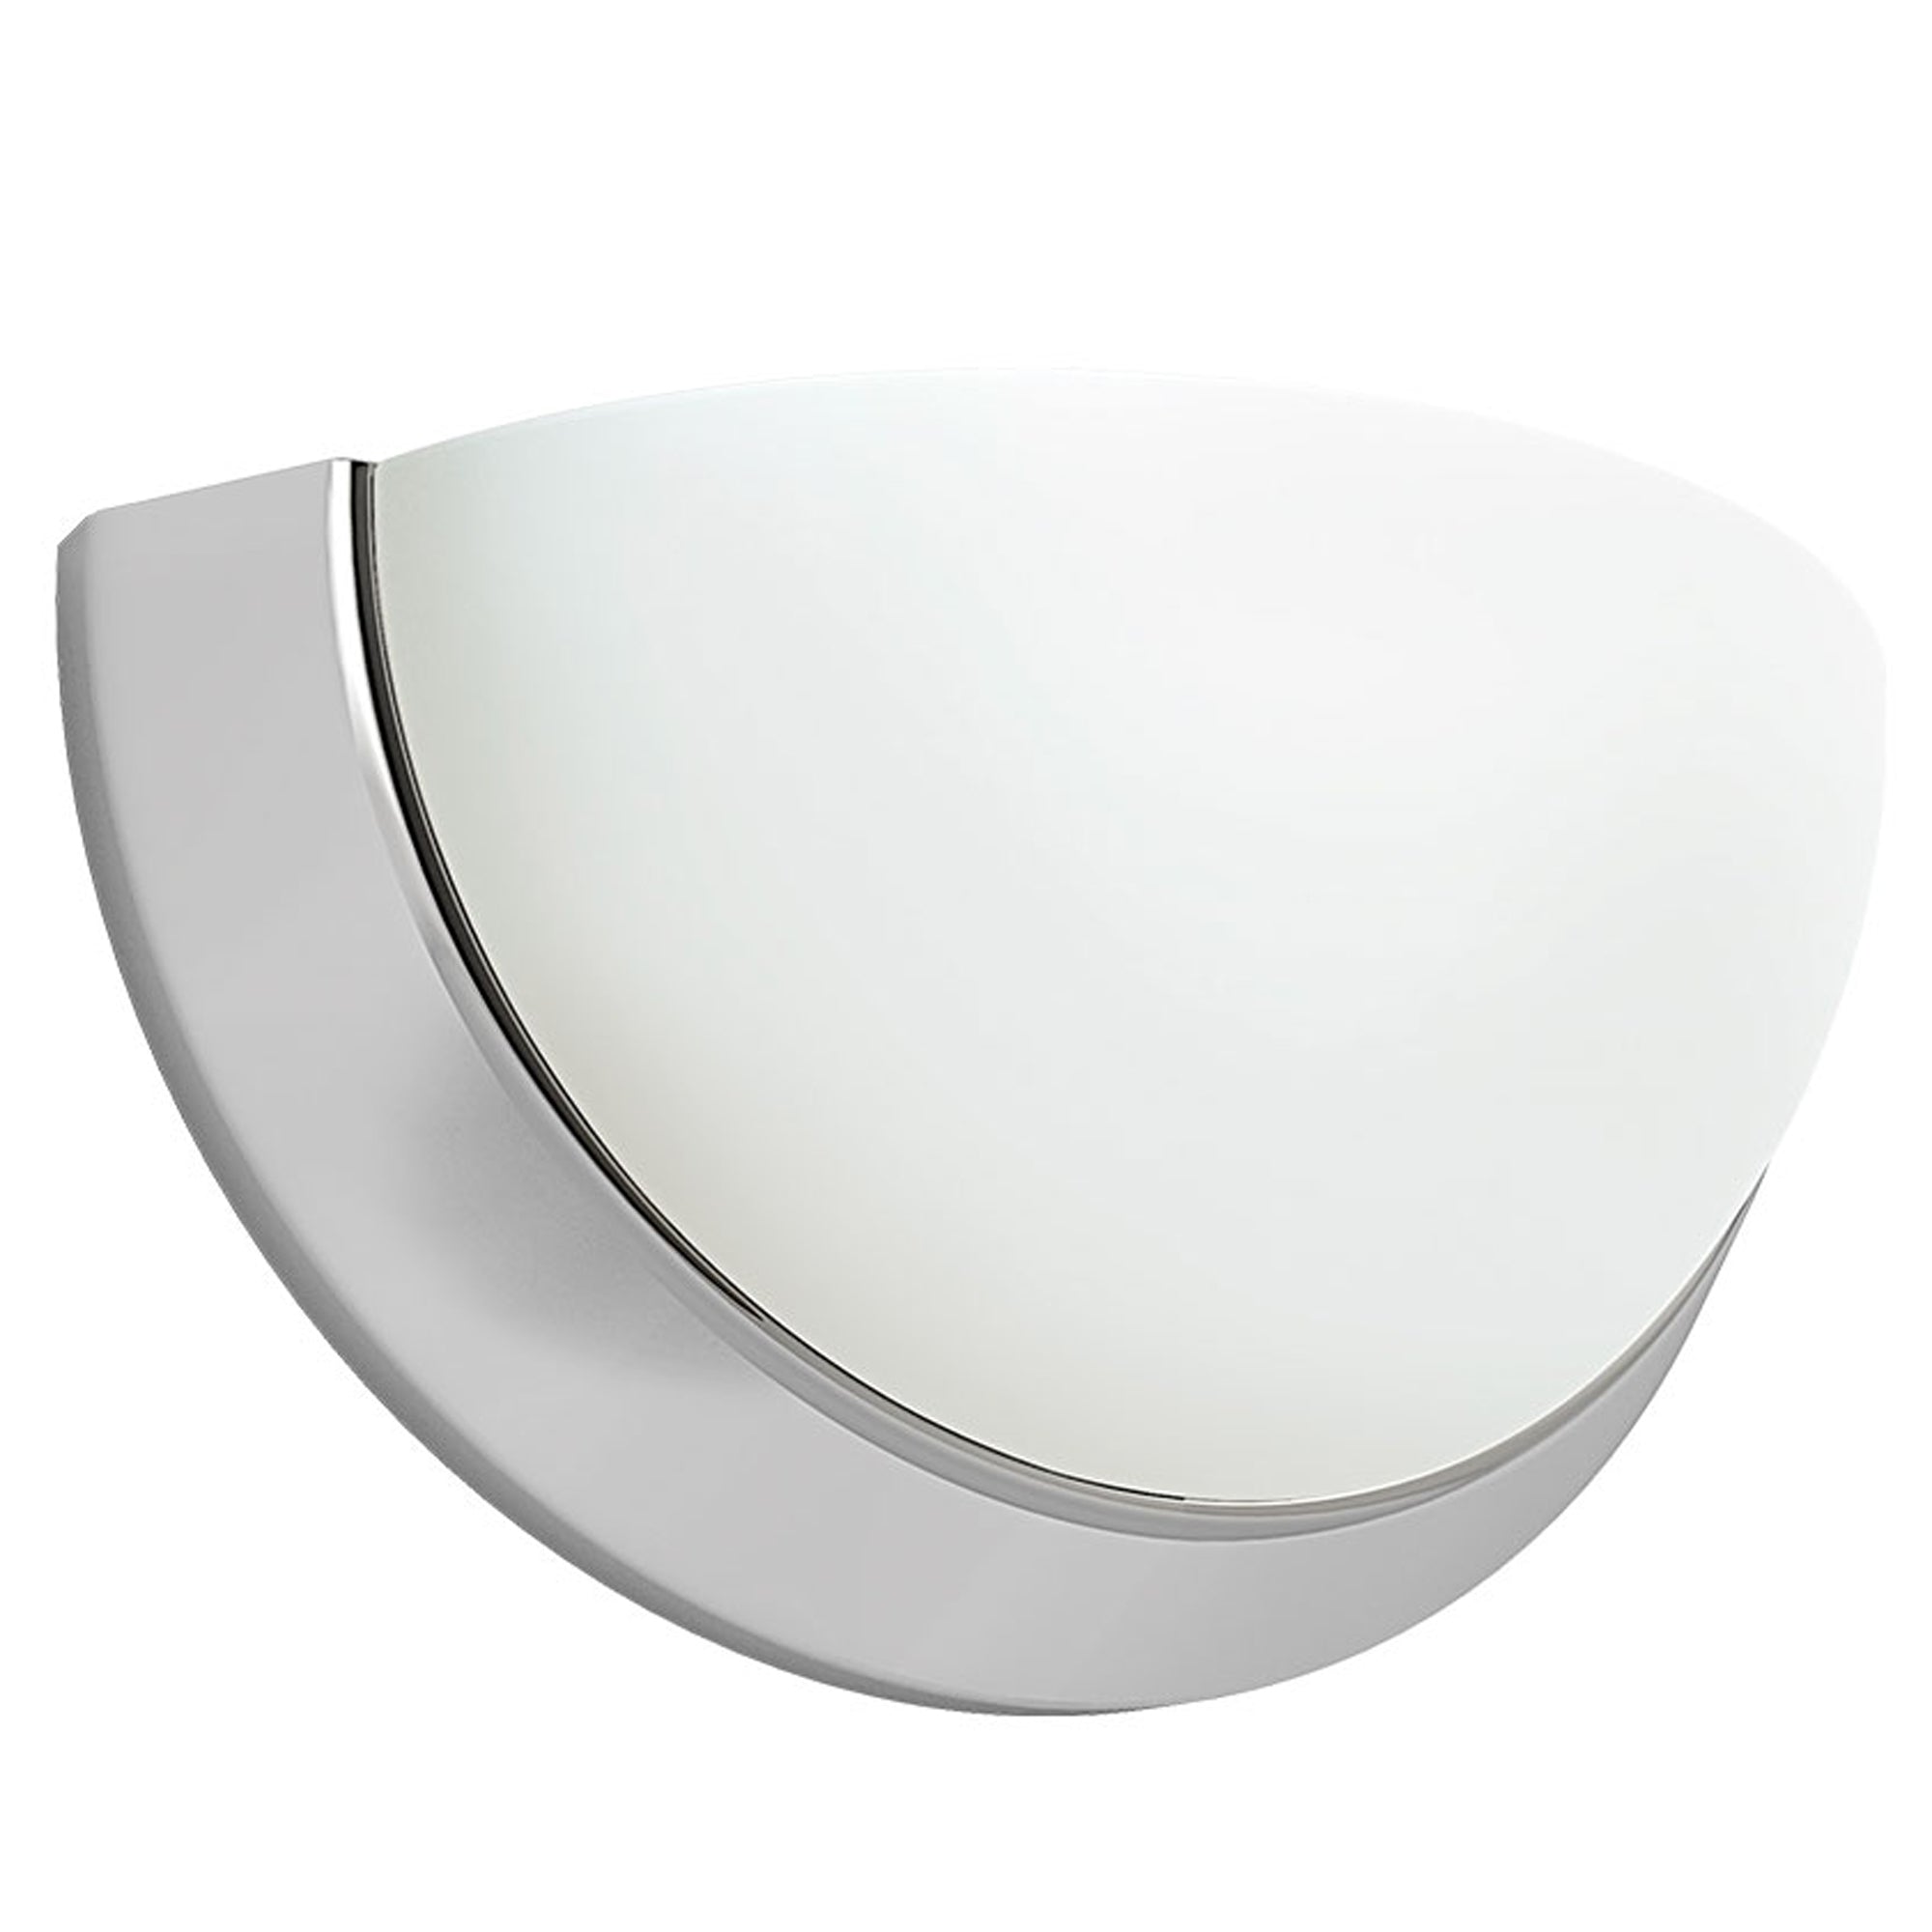 Viribright 11 in. LED Wall Sconce Brushed Nickel